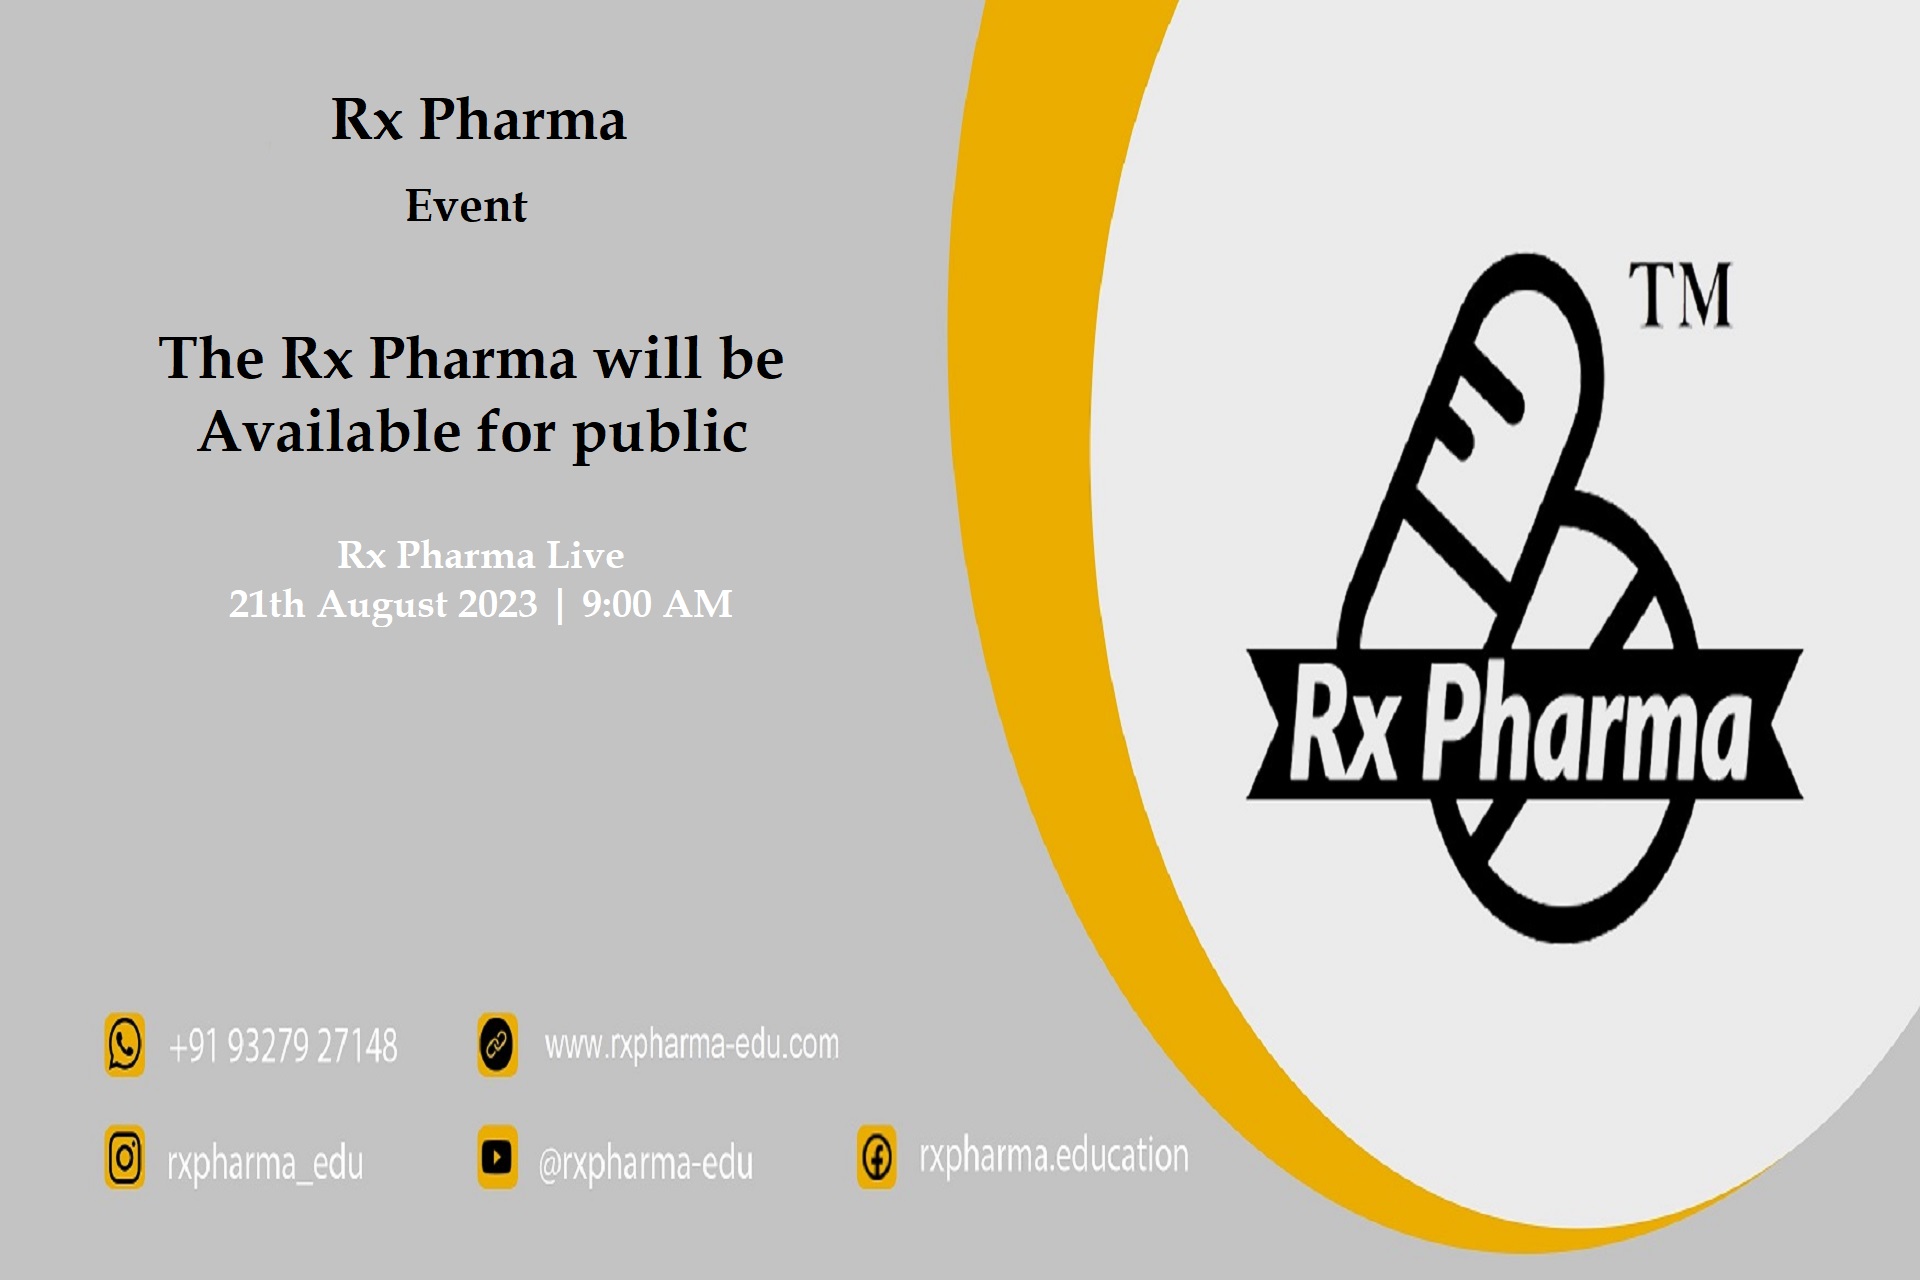 The Rx Pharma will be Available for public